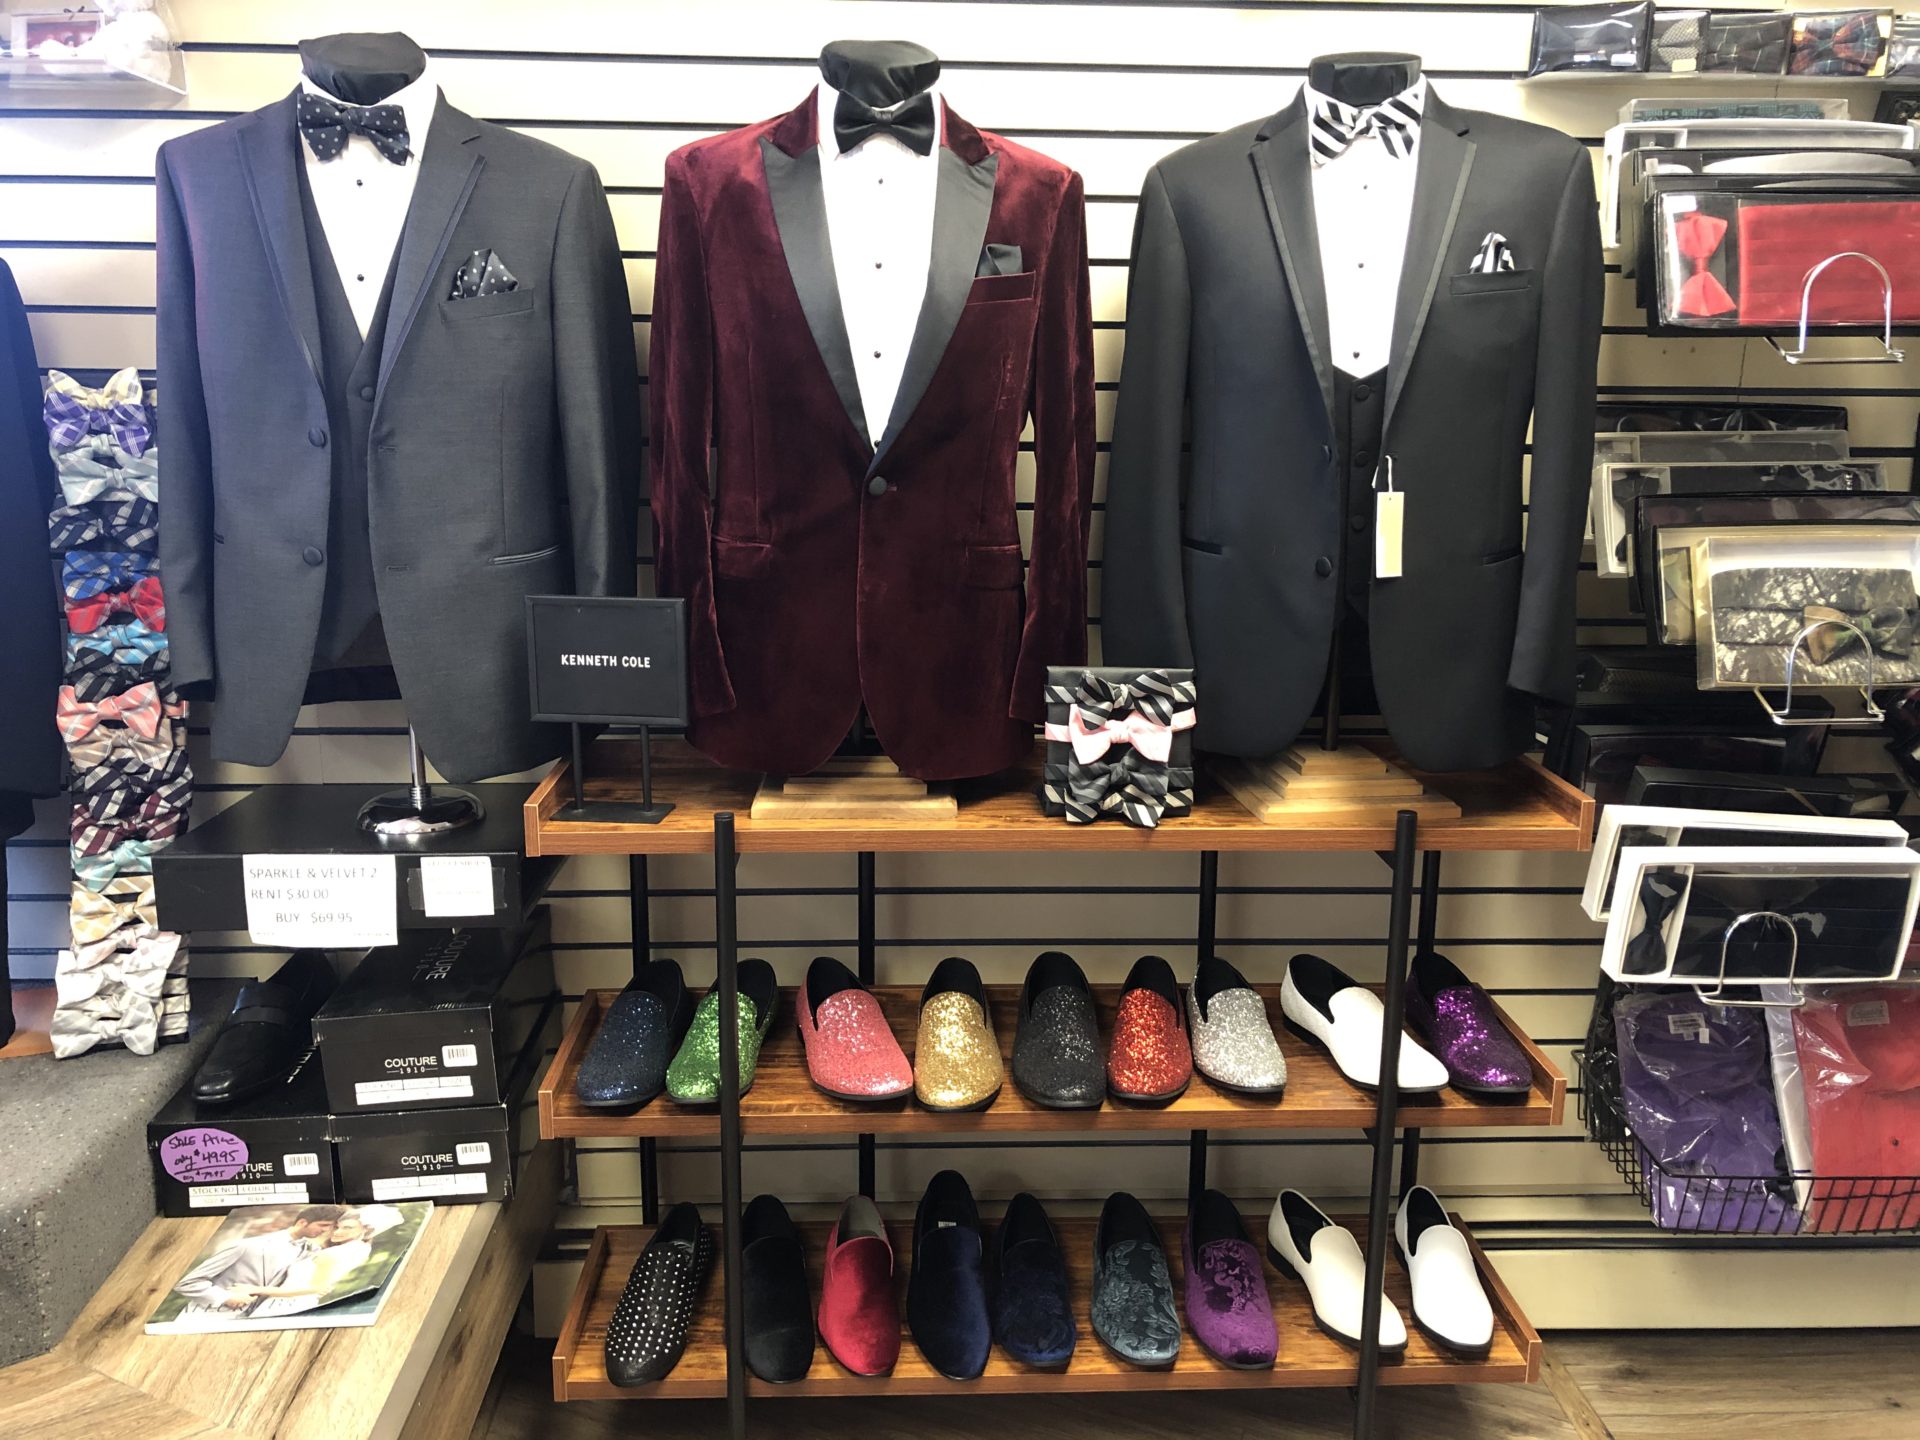 A store with suits and shoes on display.